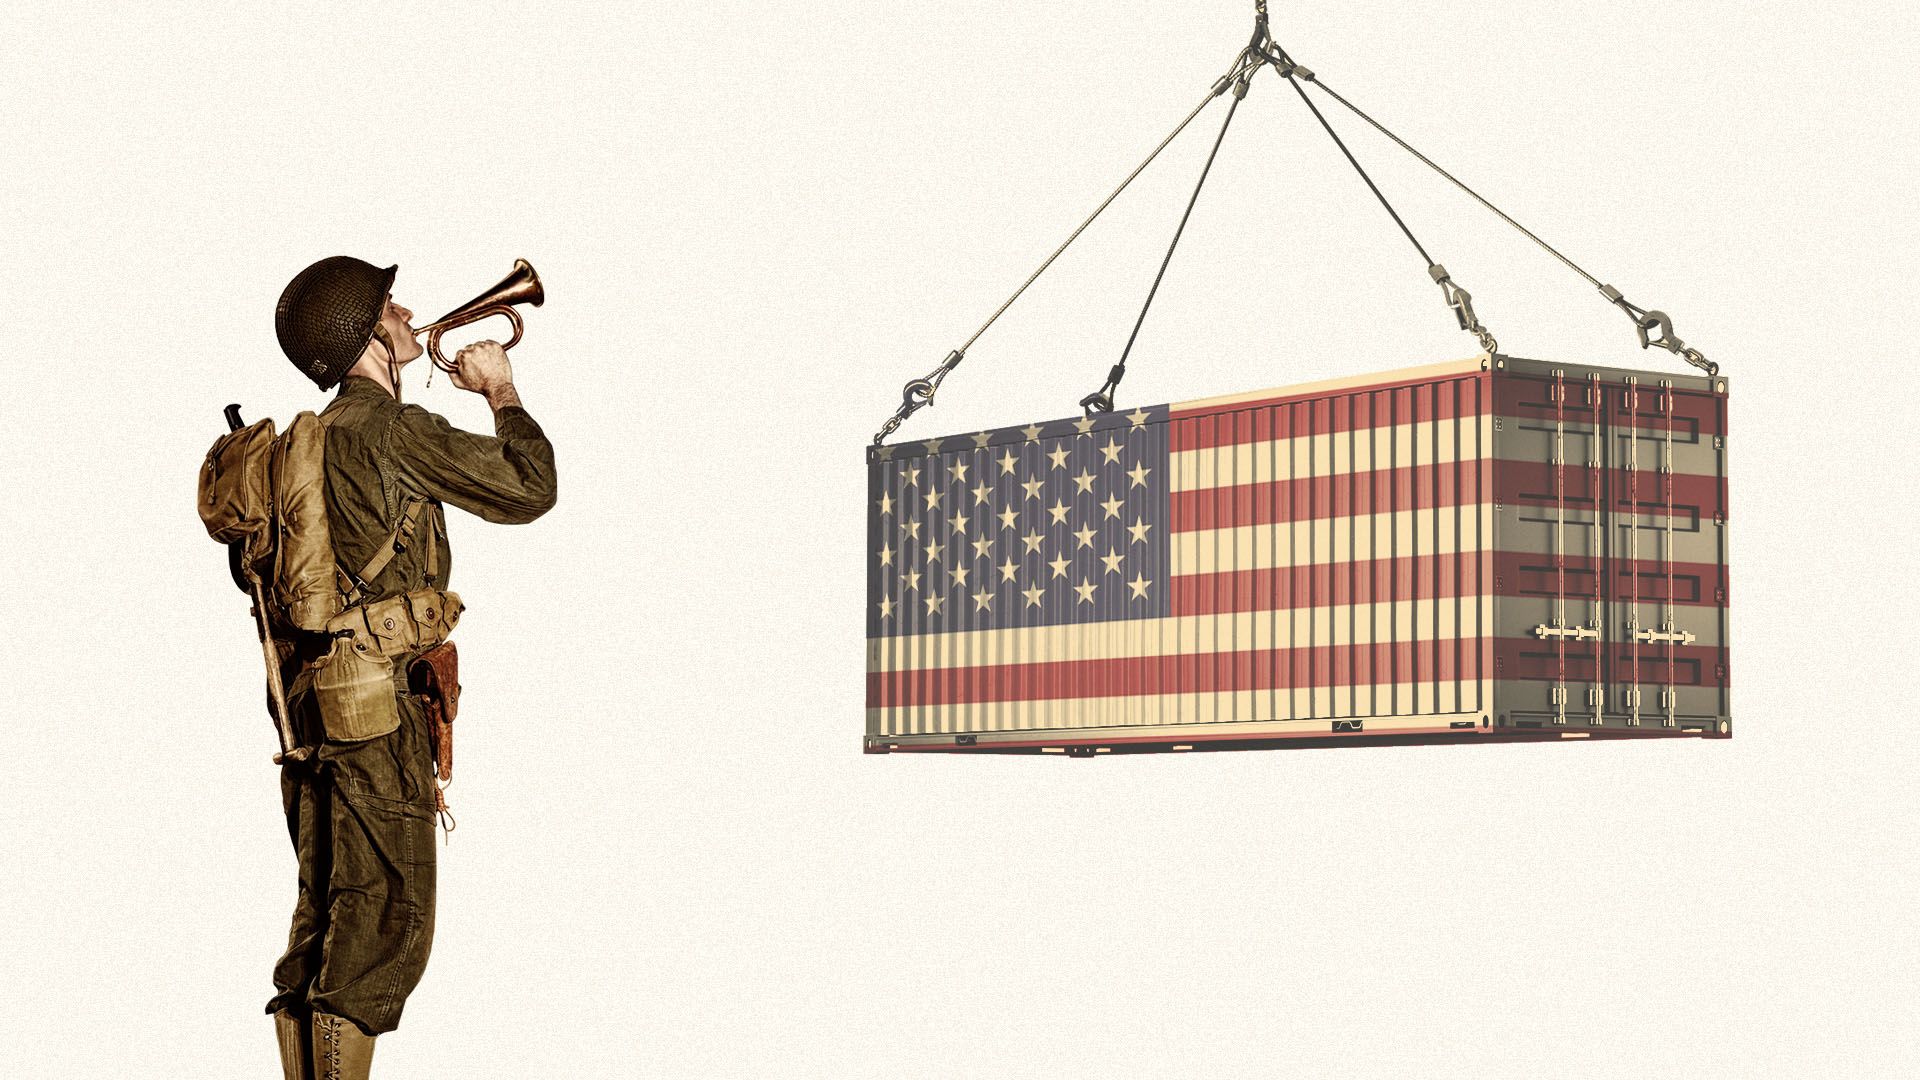 Illustration of a World War II soldier playing taps to an American flag shipping container.